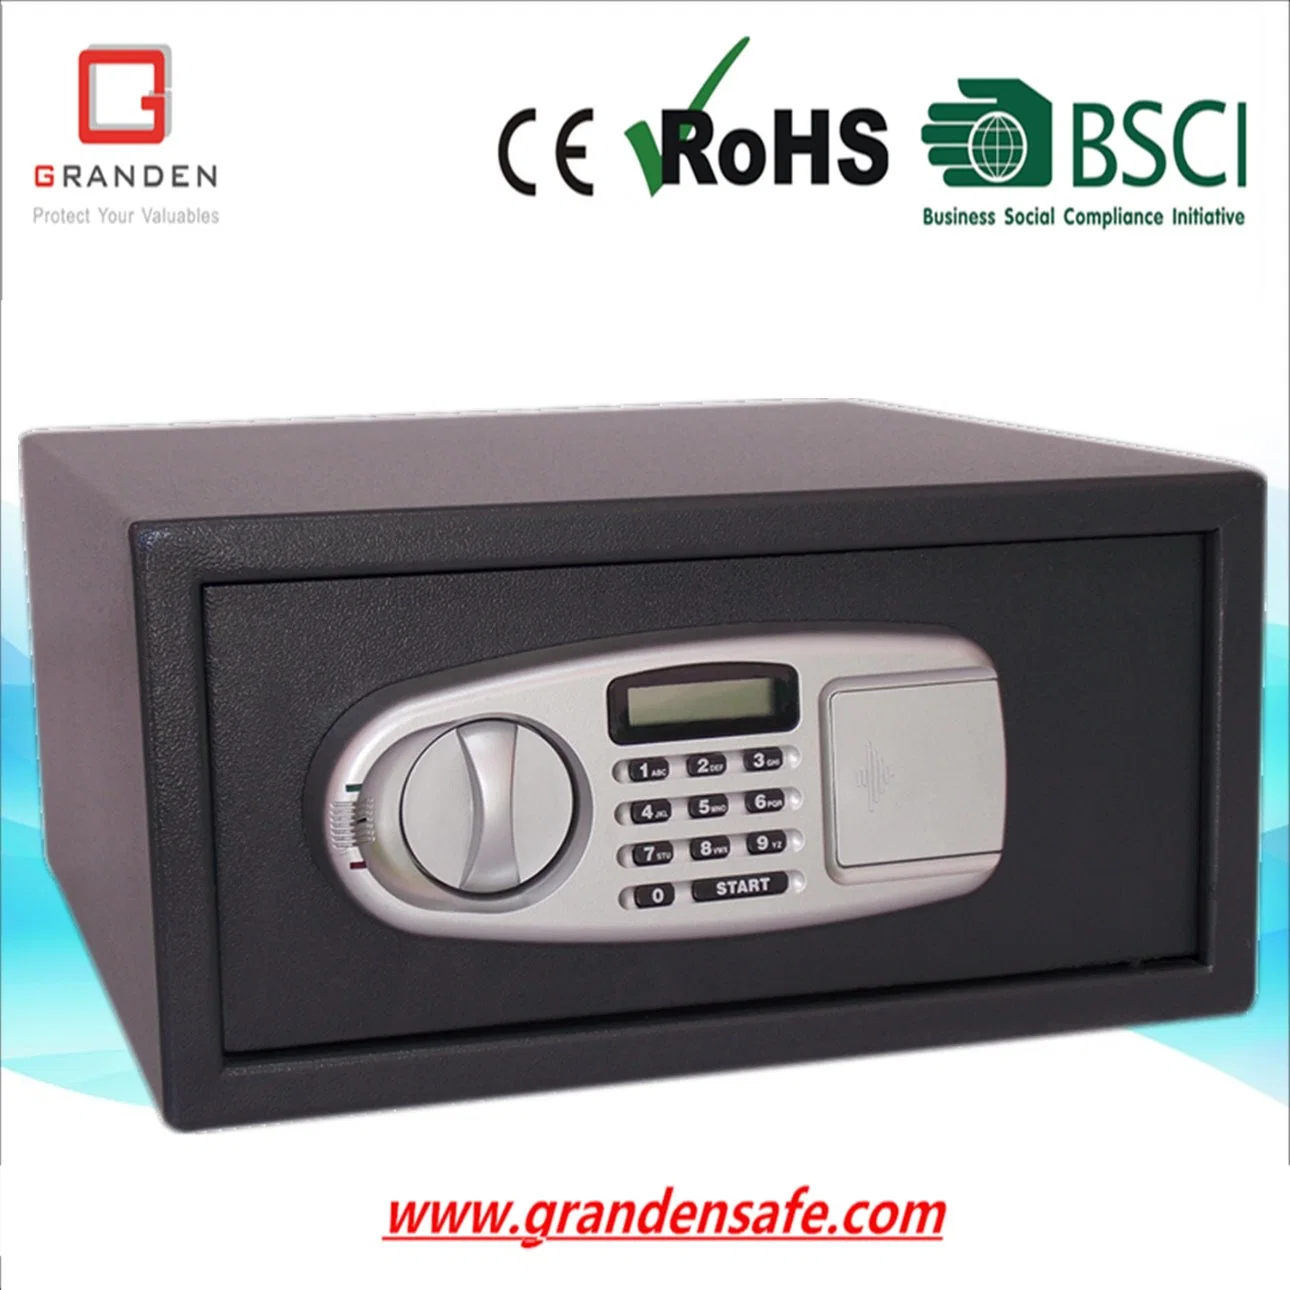 Electronics Safe with LCD Display for Office (G-40EL) Solid Steel